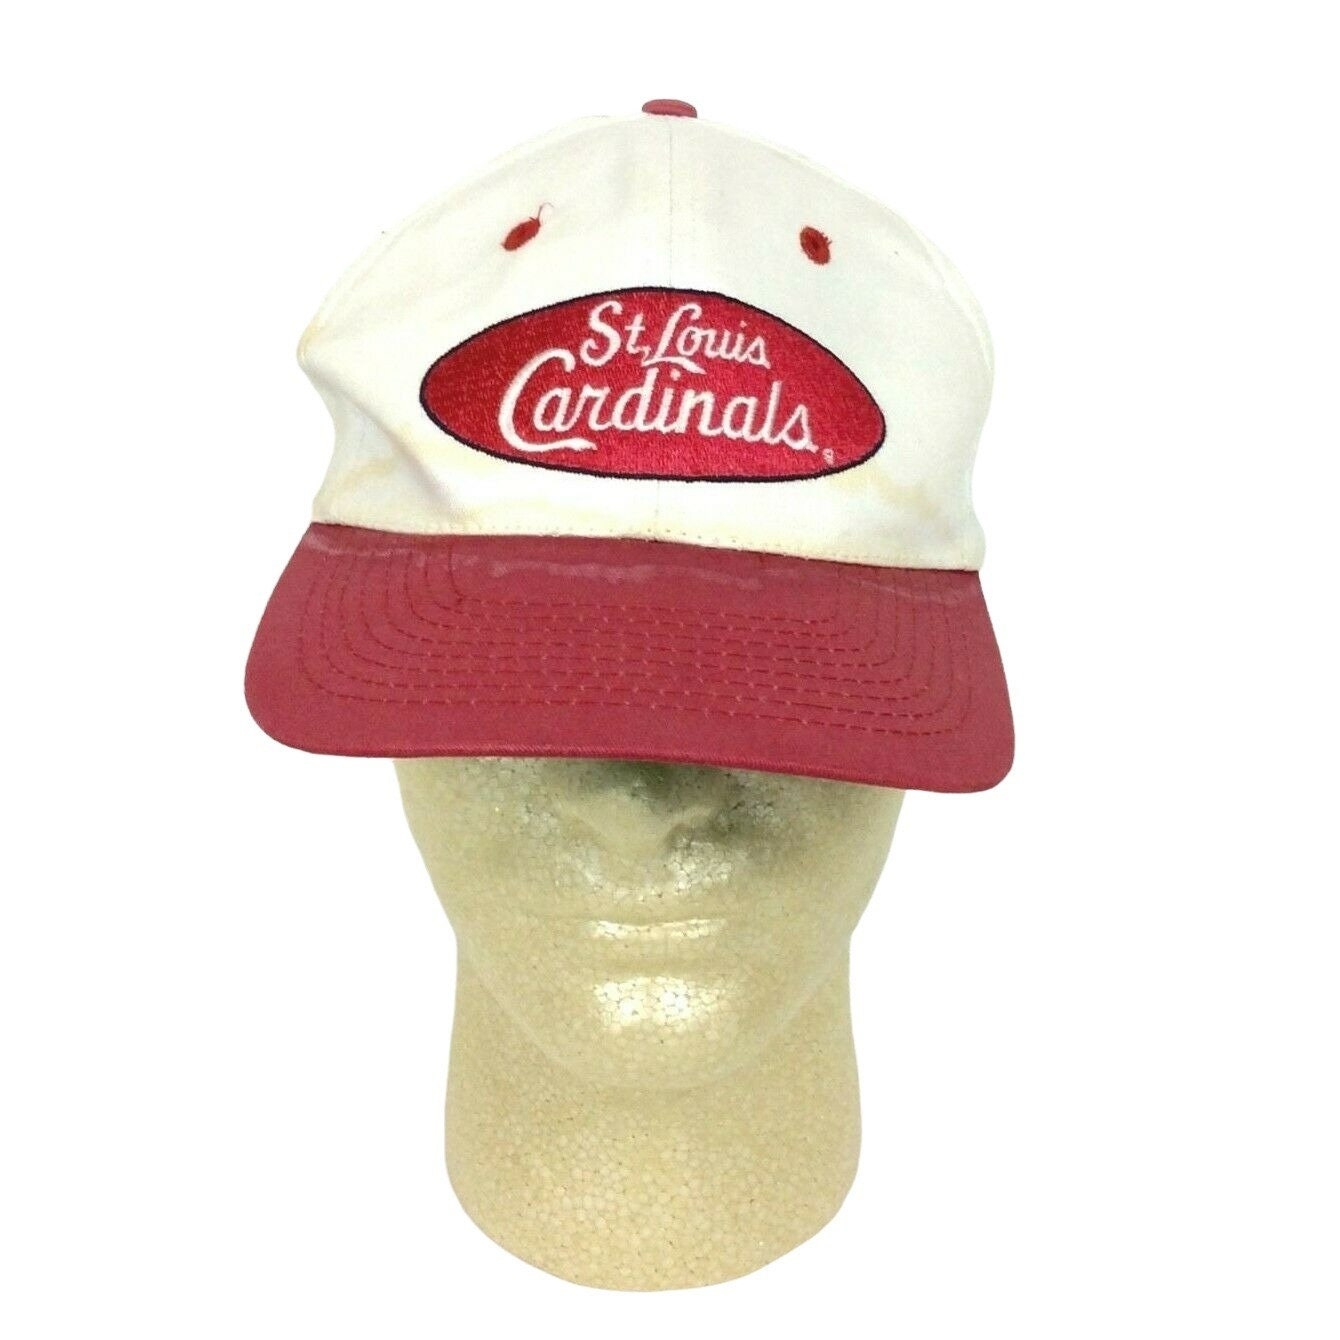 Pro Standard Men's Gray St. Louis Cardinals Washed Neon Snapback